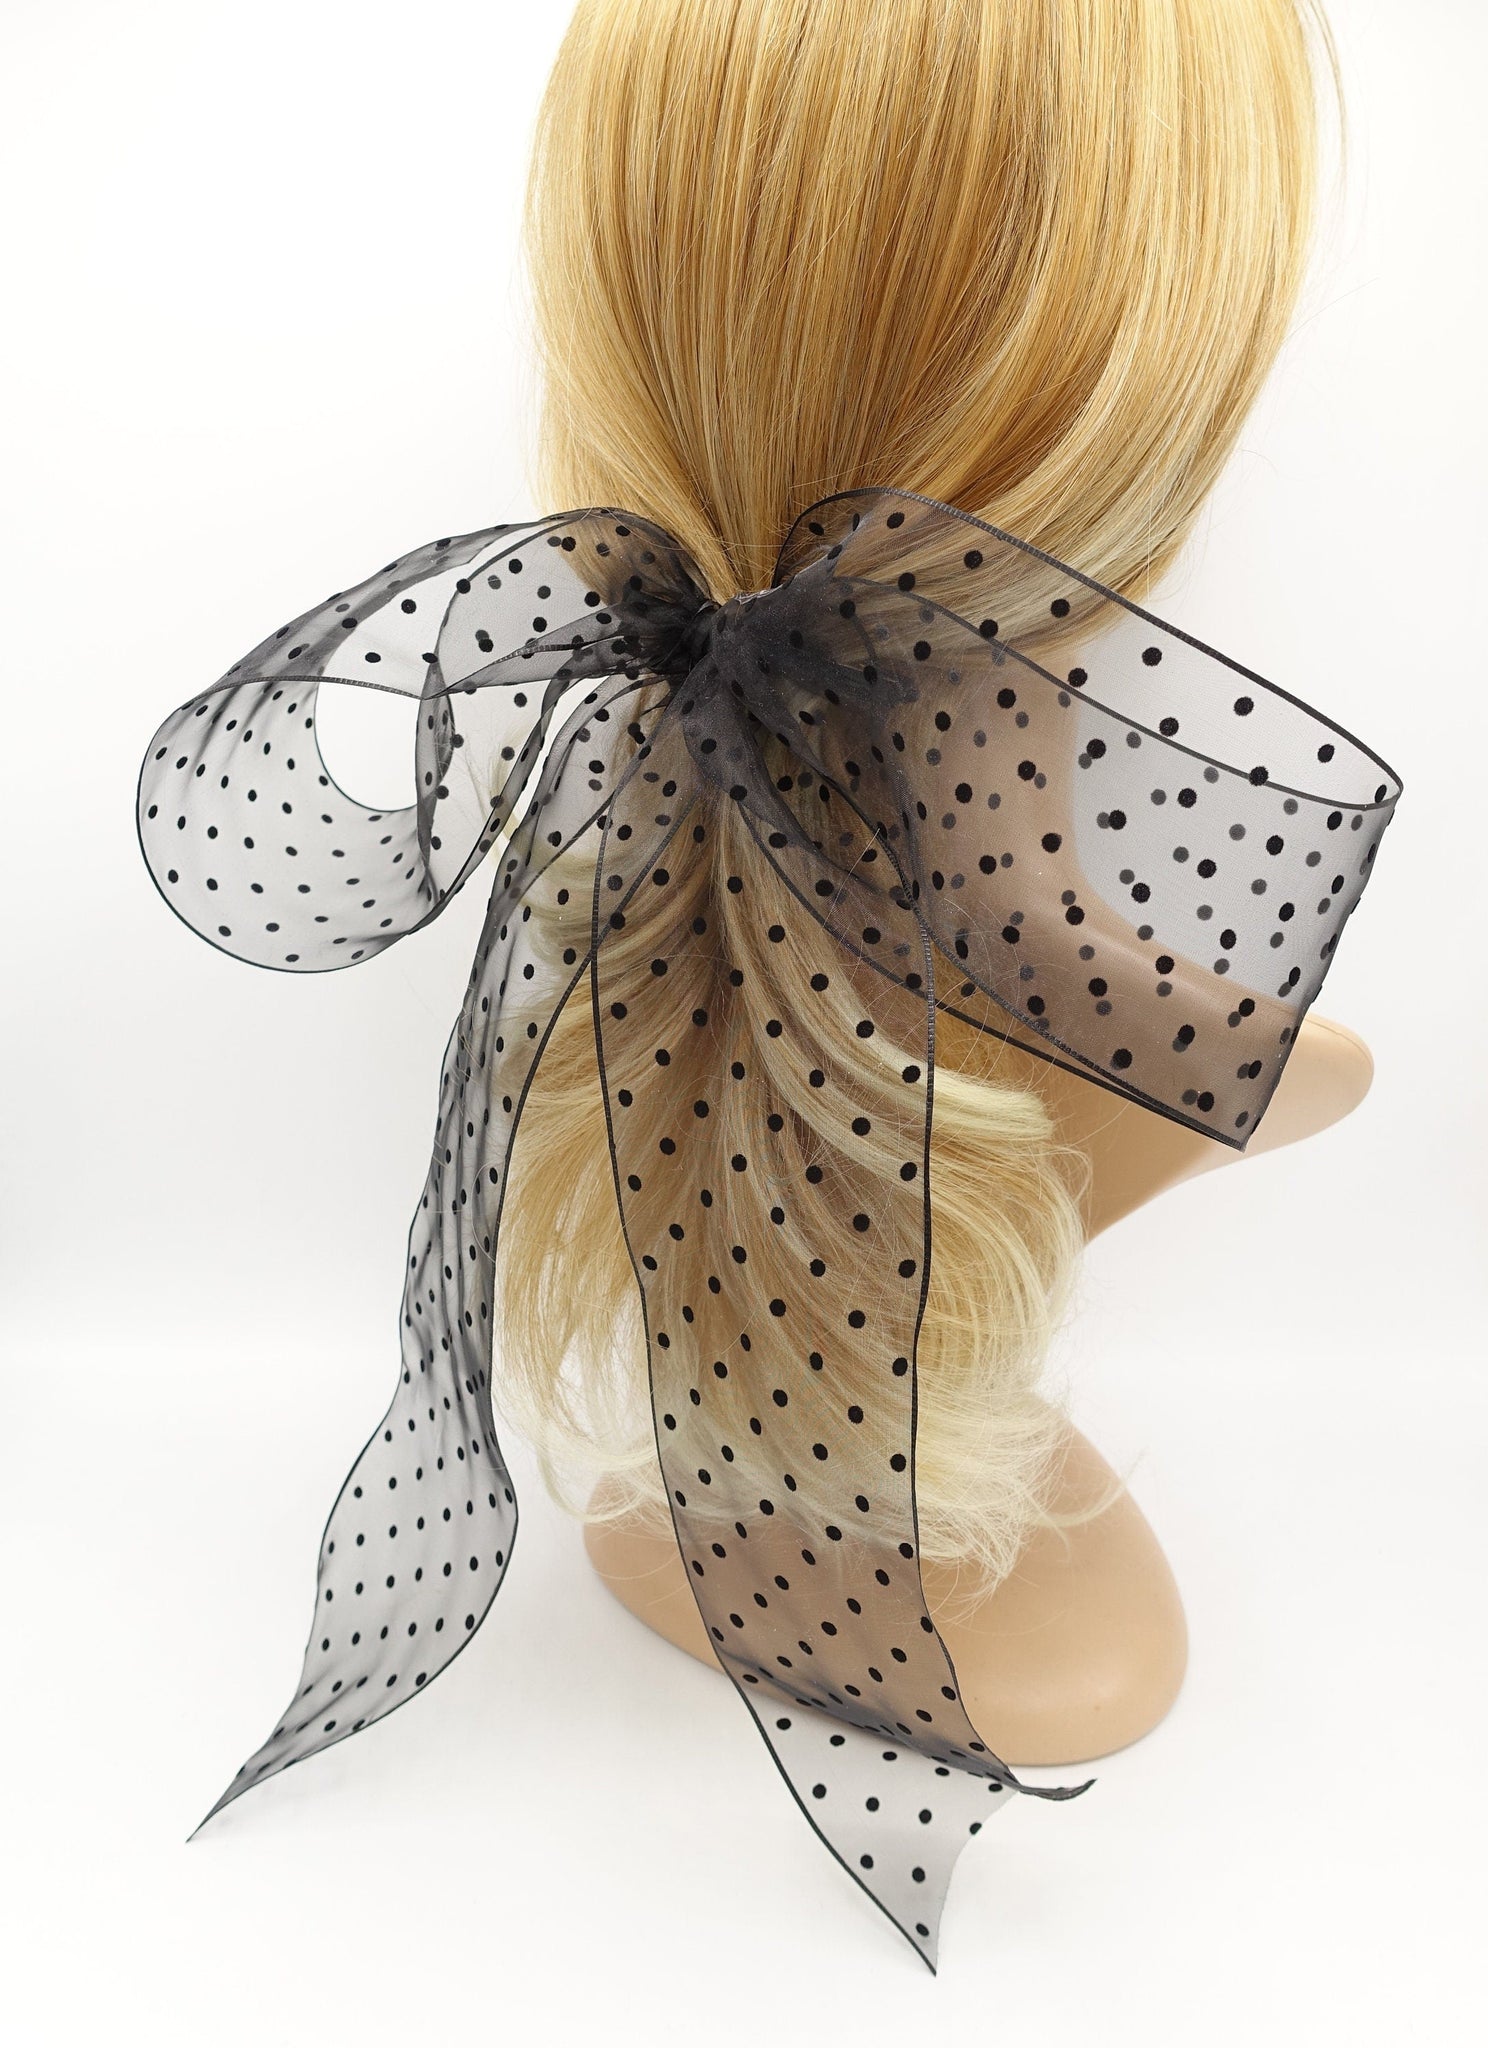 veryshine.com Barrette (Bow) organza dot hair bow solid giant stylish hair accessory for women